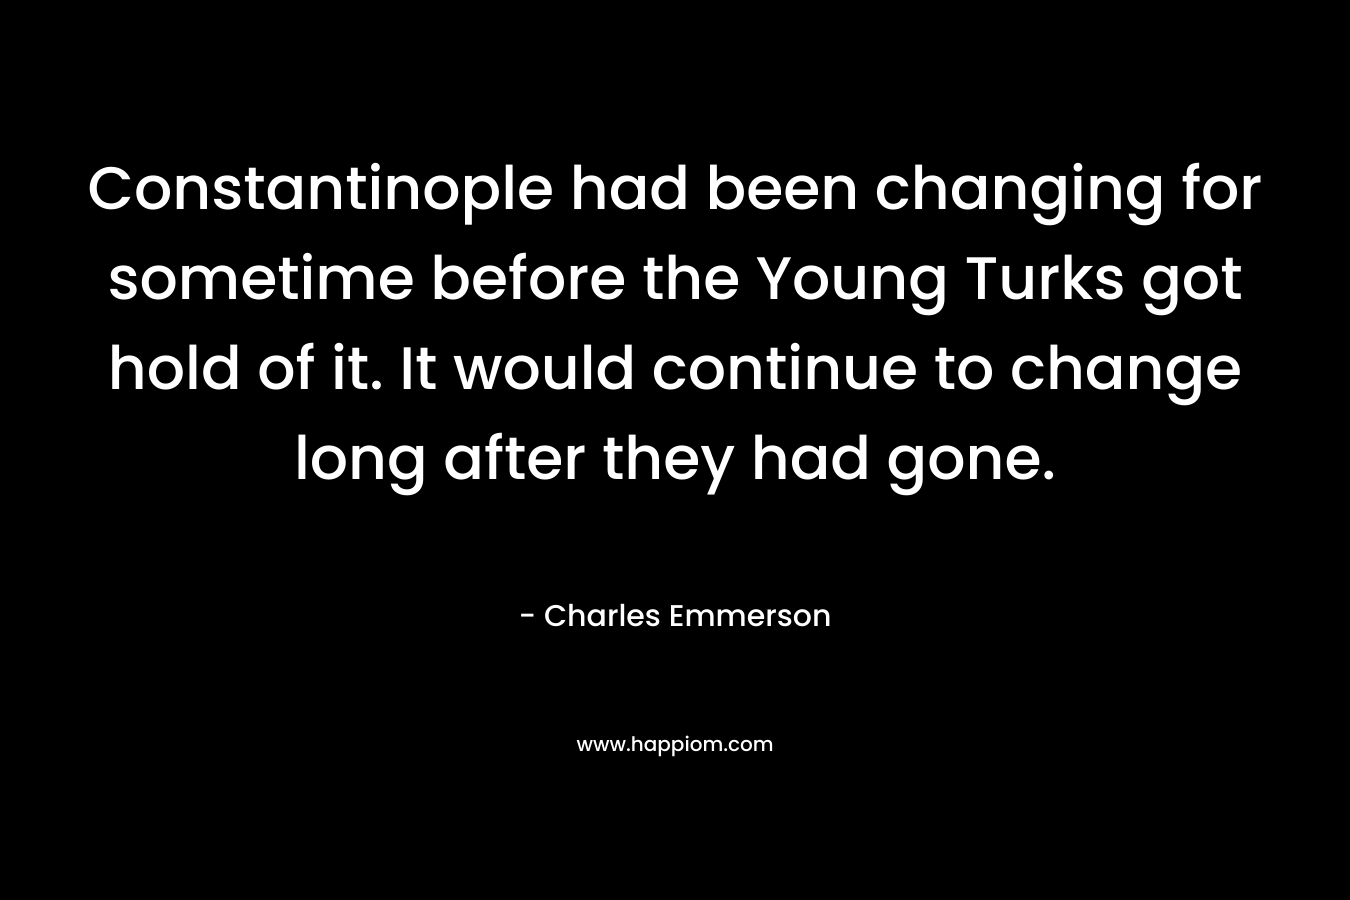 Constantinople had been changing for sometime before the Young Turks got hold of it. It would continue to change long after they had gone.